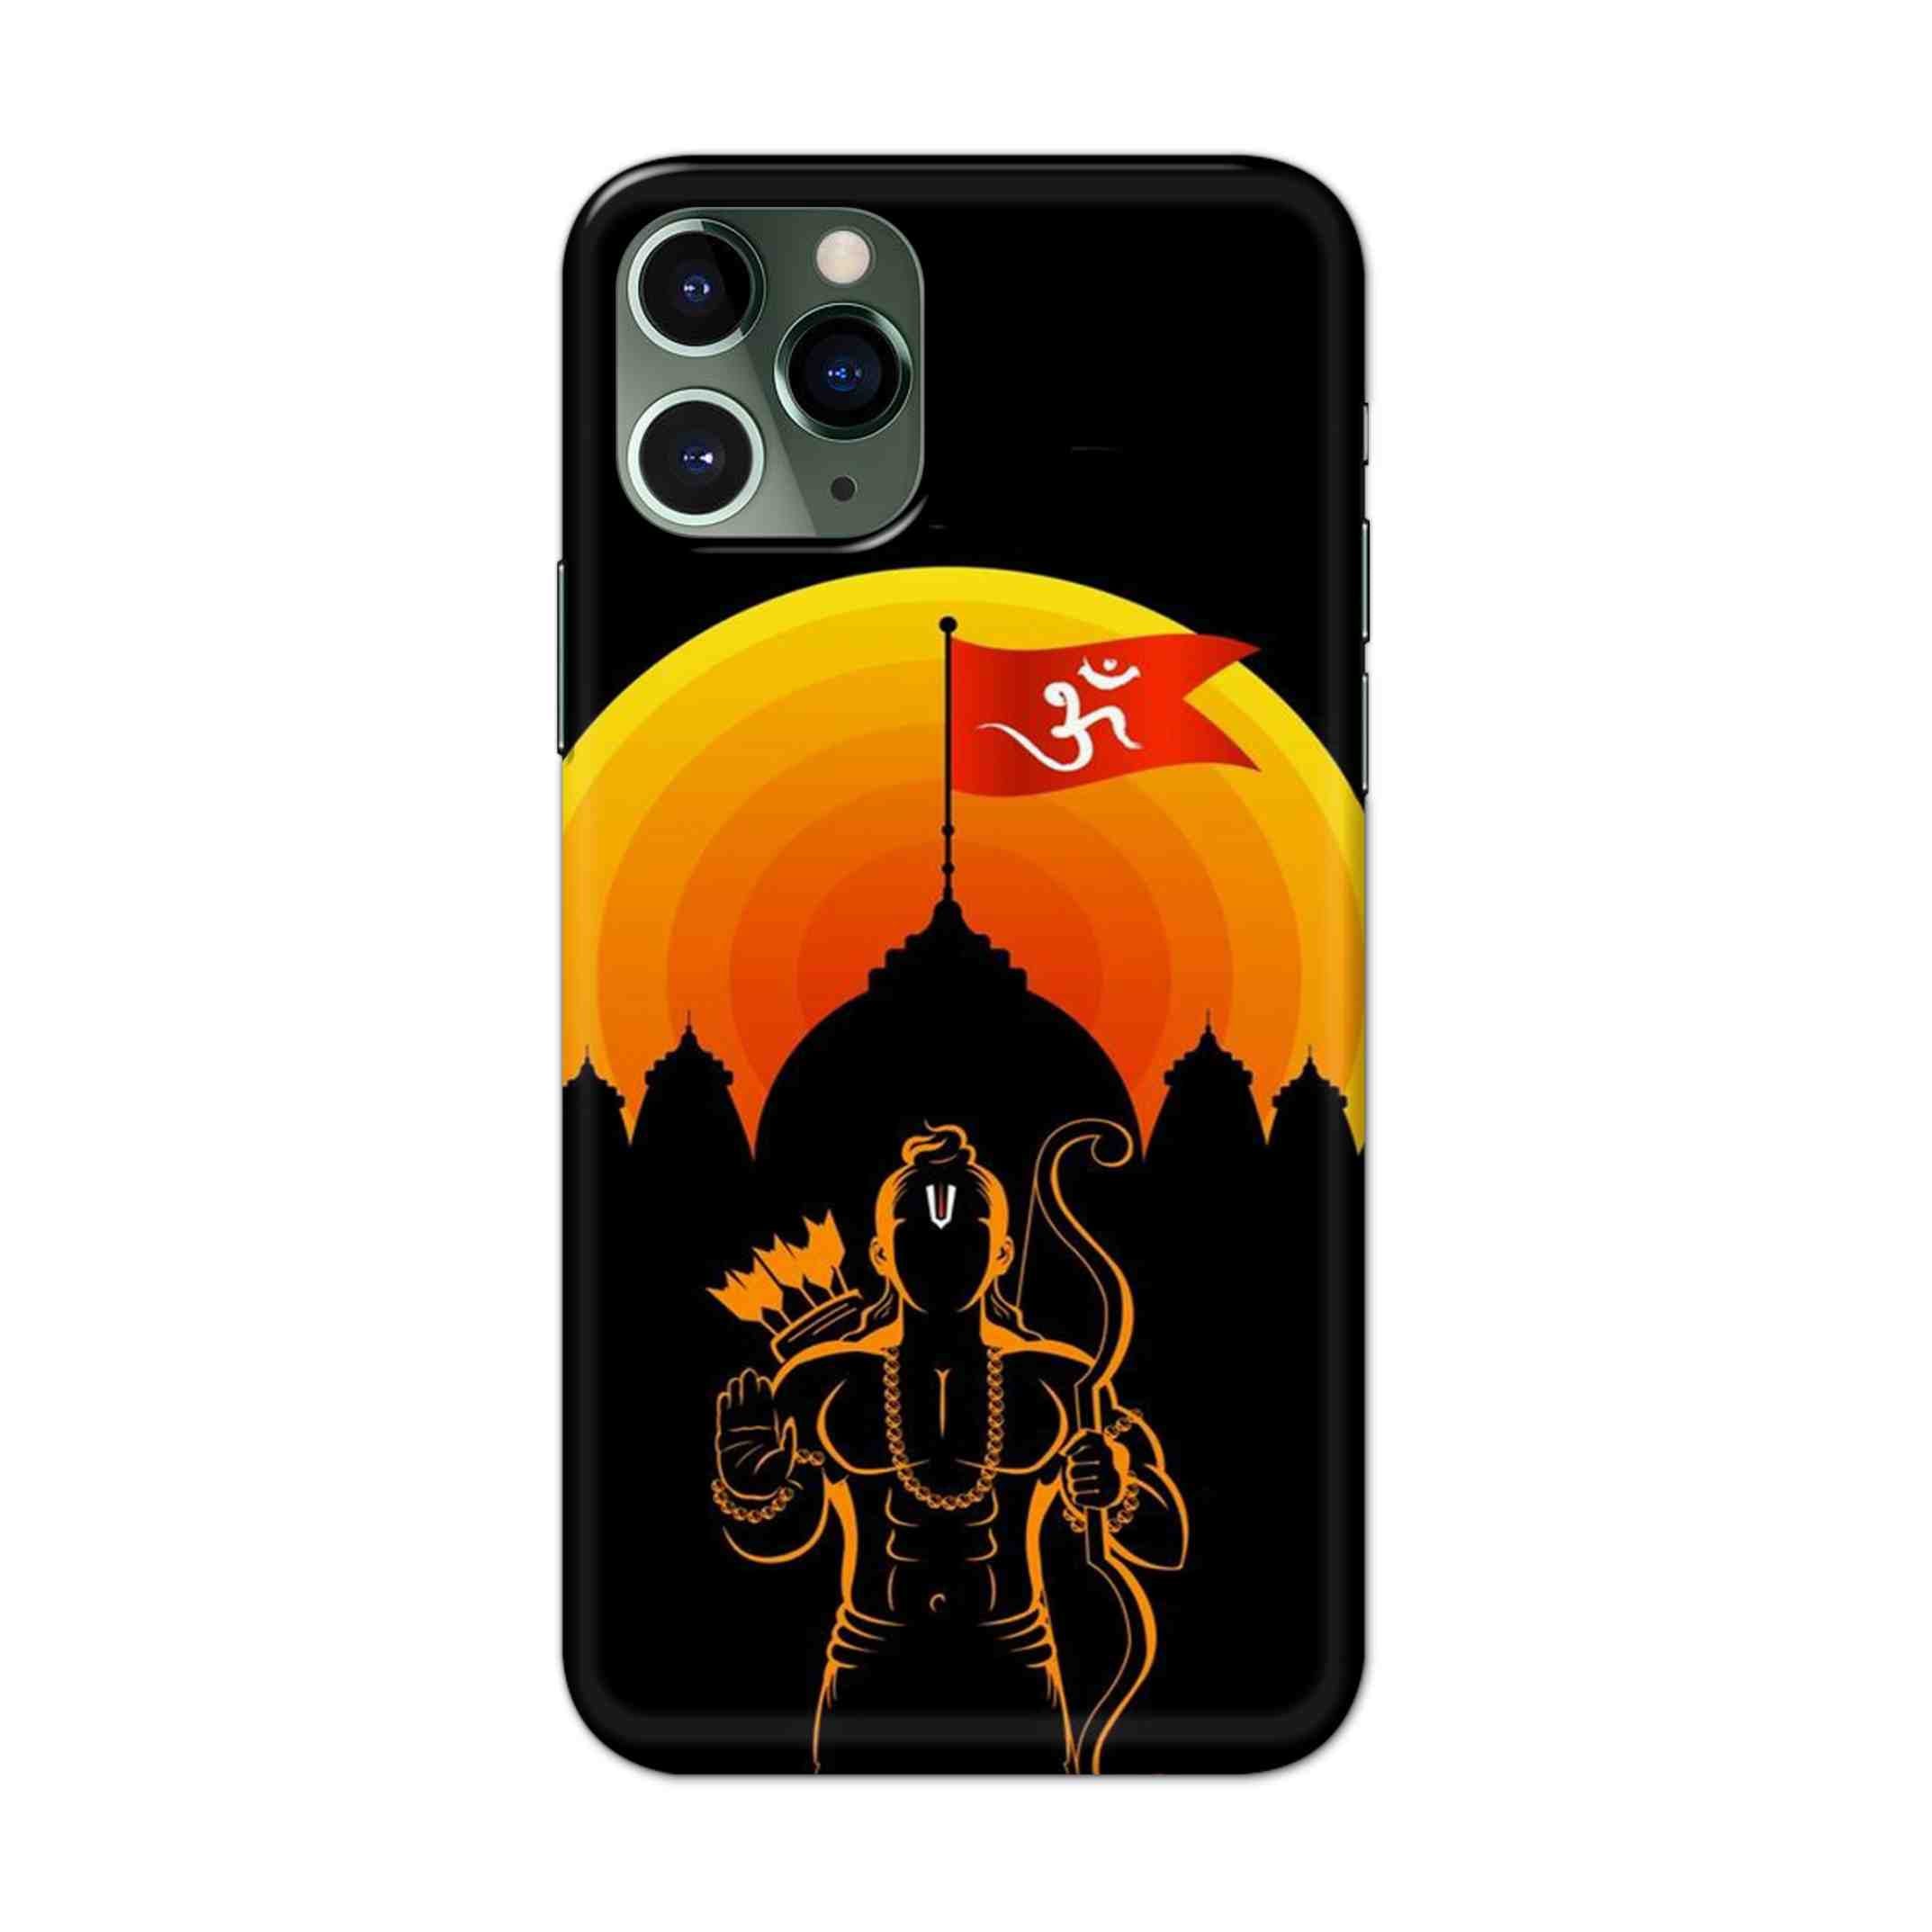 Buy Ram Ji Hard Back Mobile Phone Case/Cover For iPhone 11 Pro Online